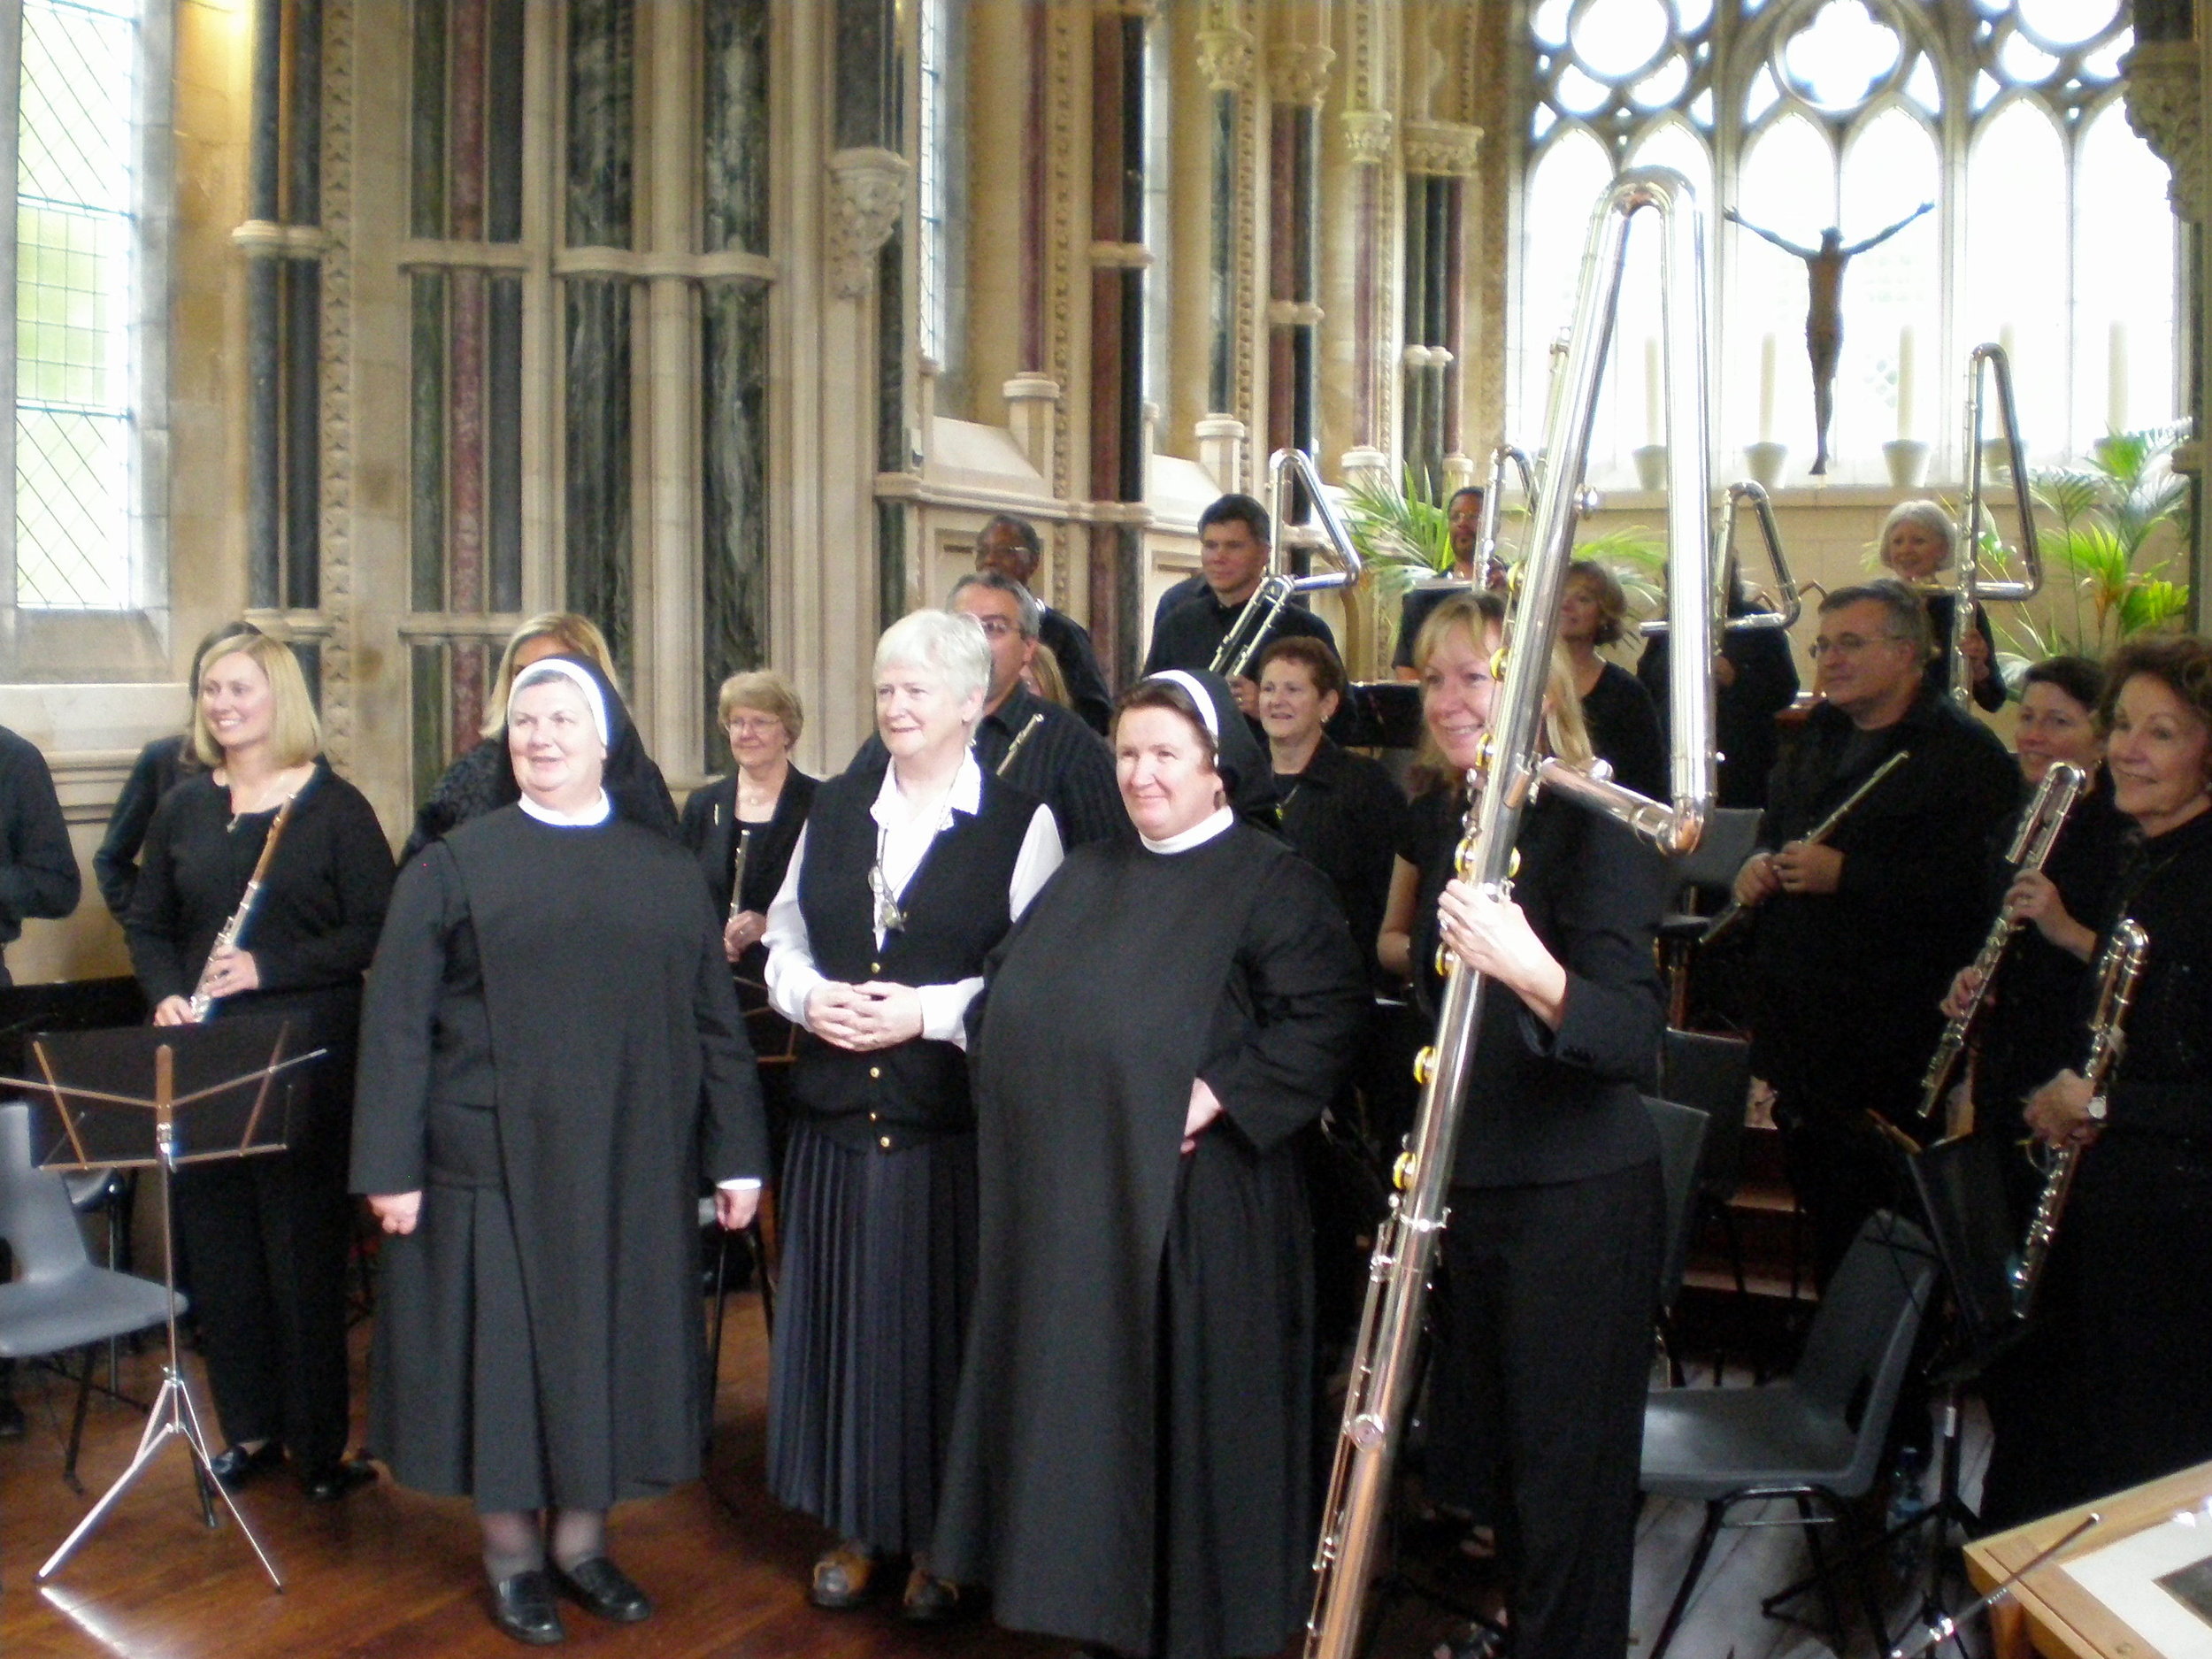 Visiting the nuns after the performance at Kylemore Abbey